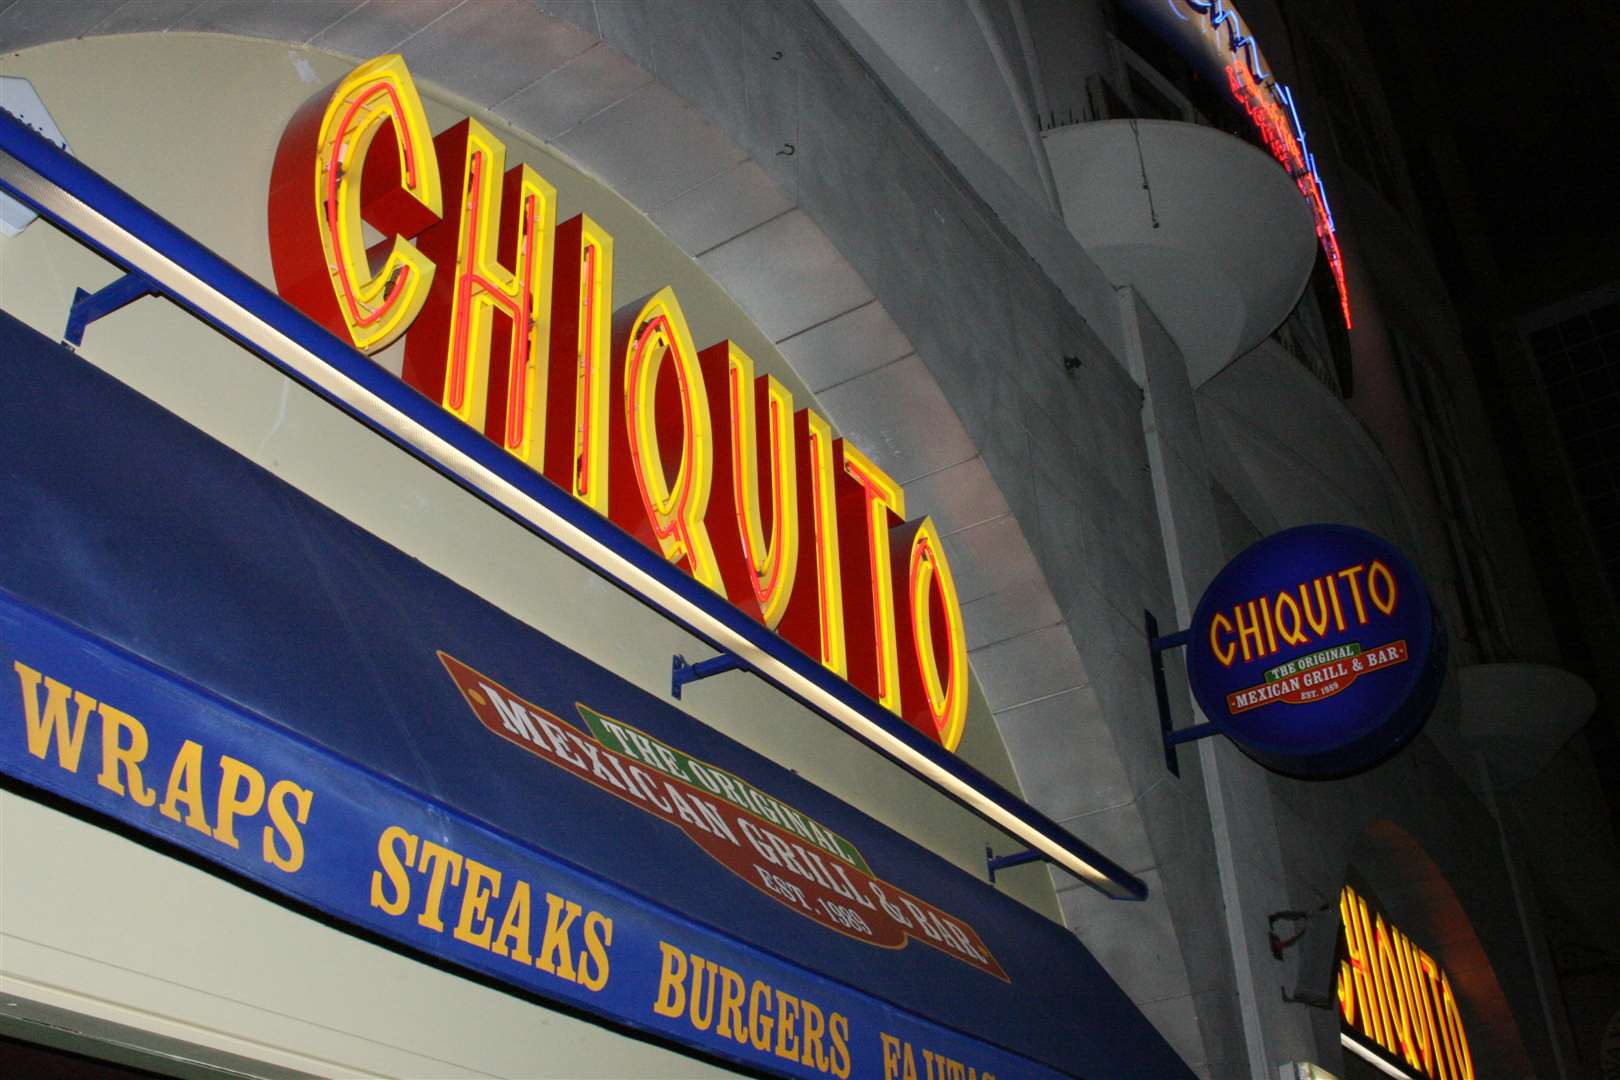 Two thirds of all Chiquito stores will not reopen after the coronavirus outbreak ends